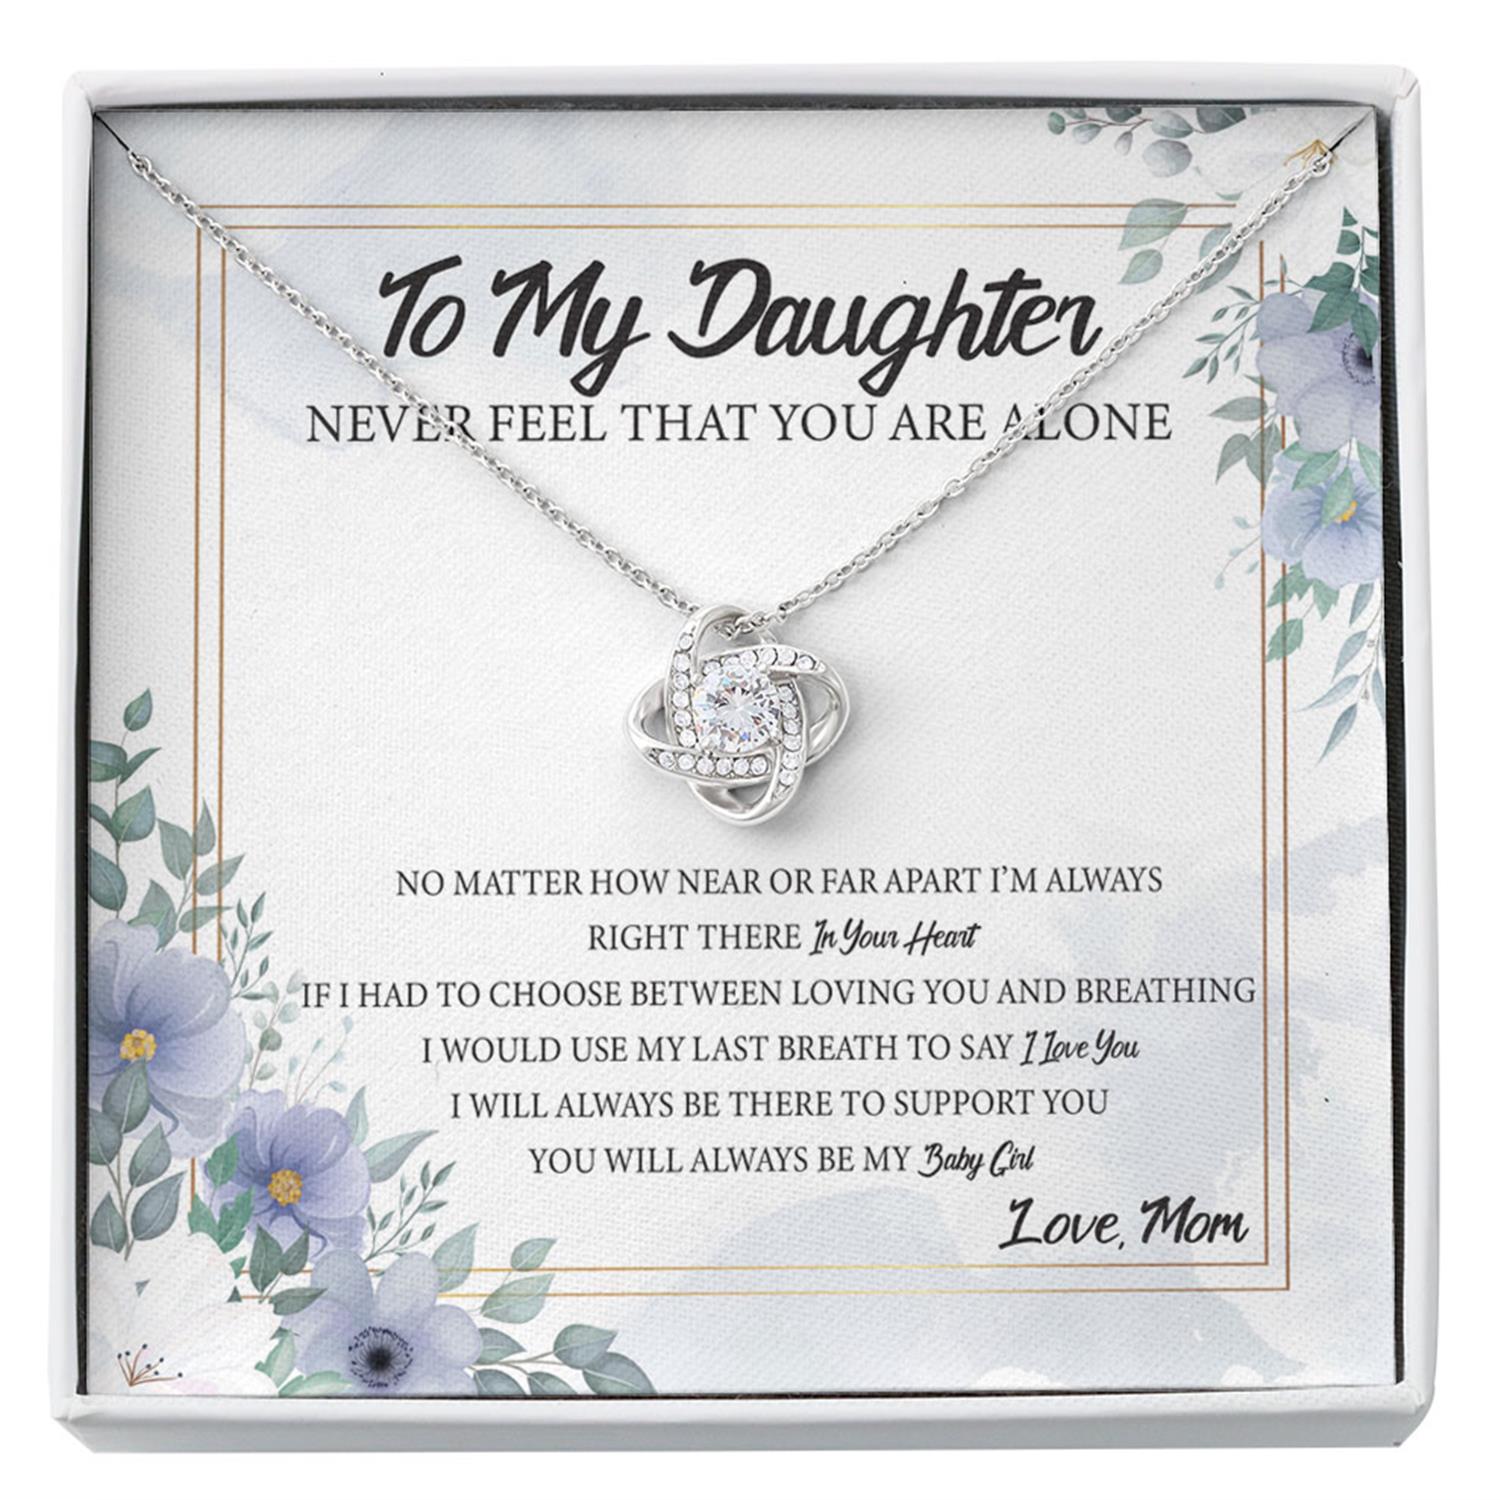 Daughter Necklace, Mom Necklace, Mother Daughter Necklace, To Daughter, Not Alone, Last Breath Love You Custom Necklace